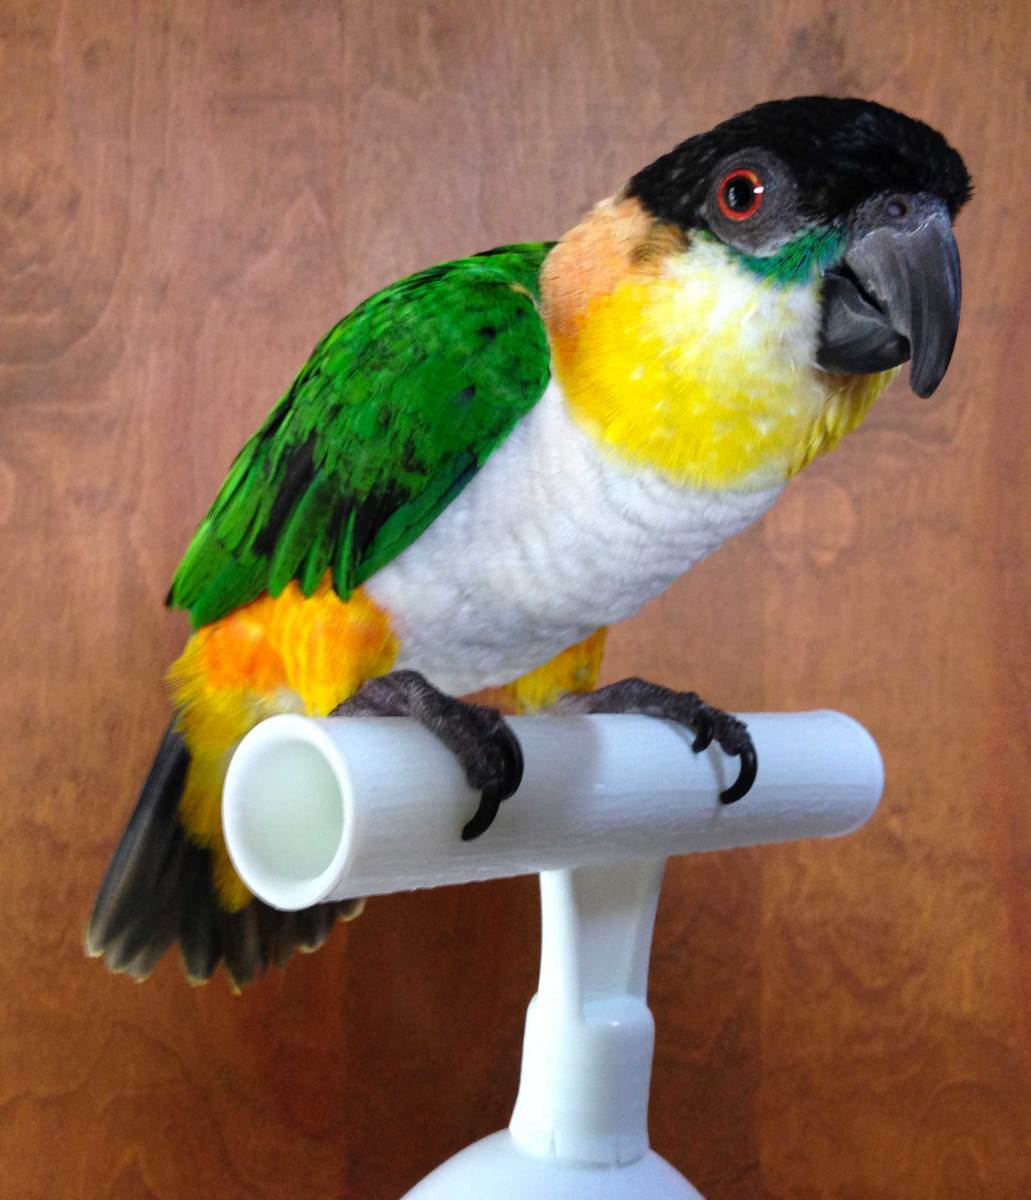 Aggression in Black Headed Caiques